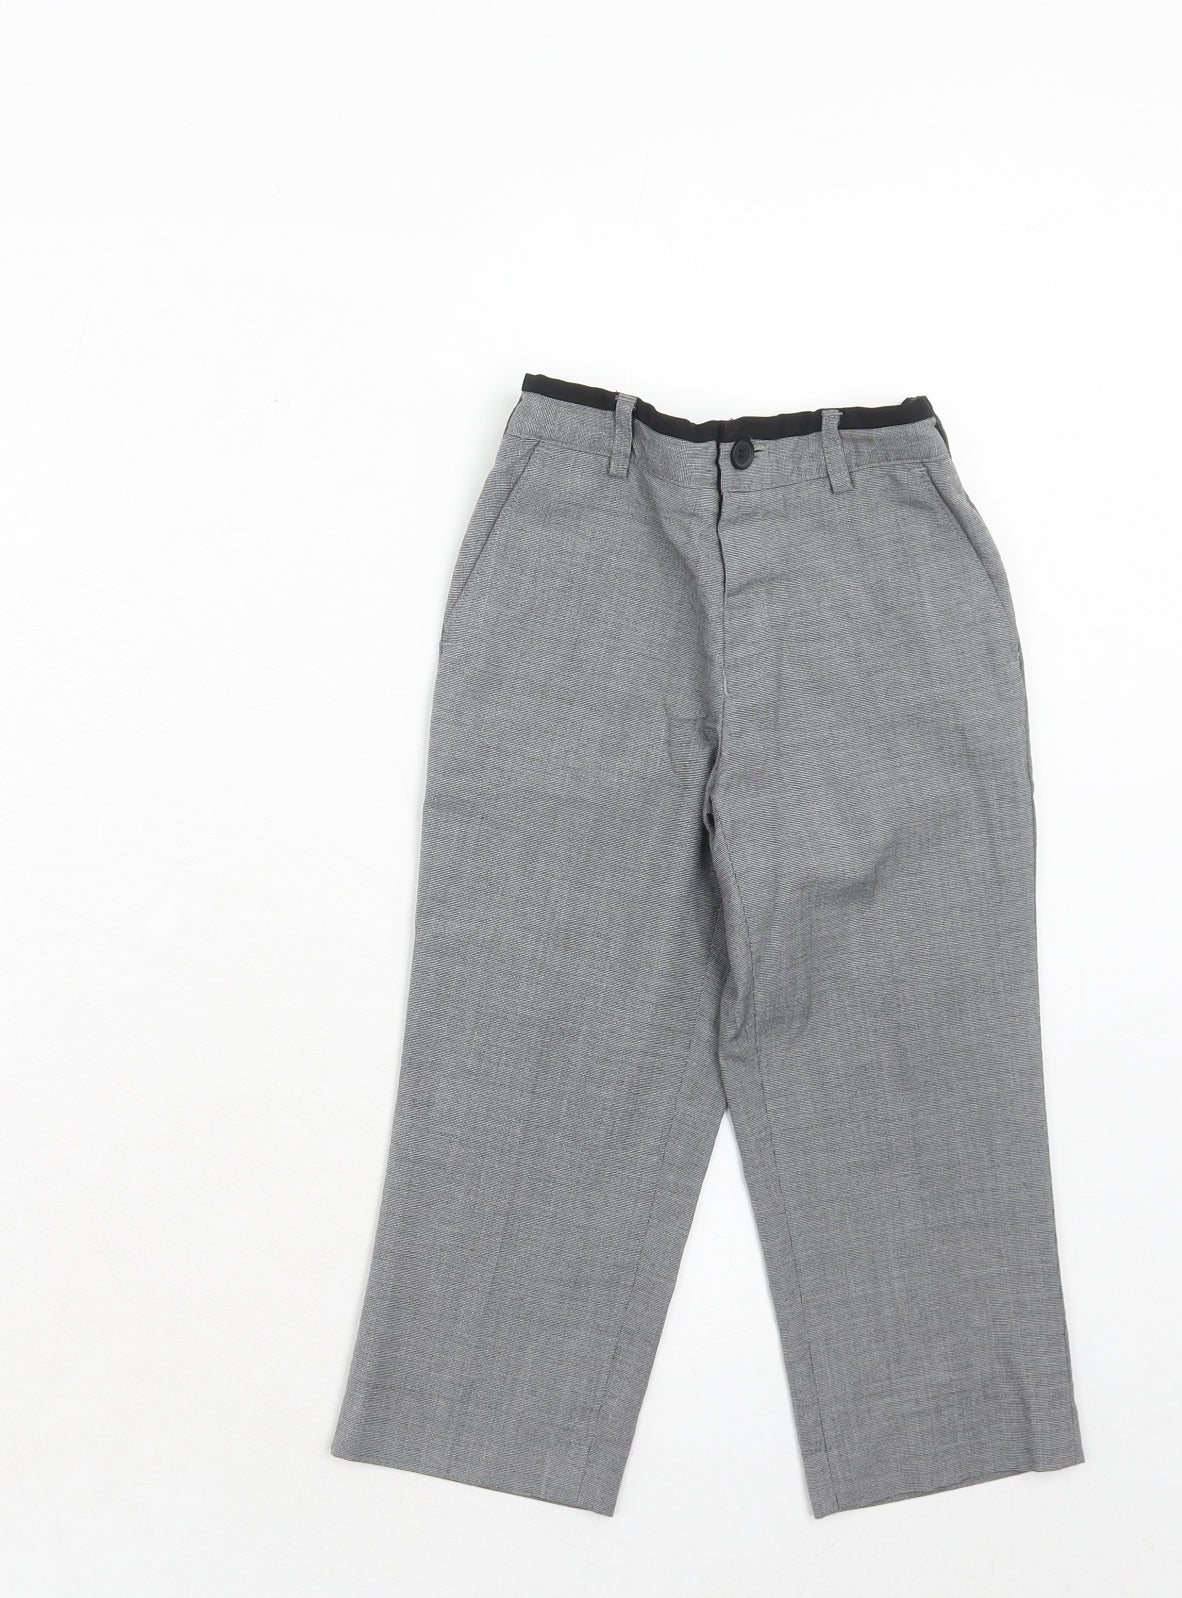 Duck & Dodge Boys Grey Polyester Chino Trousers Size 3 Years Regular Zip